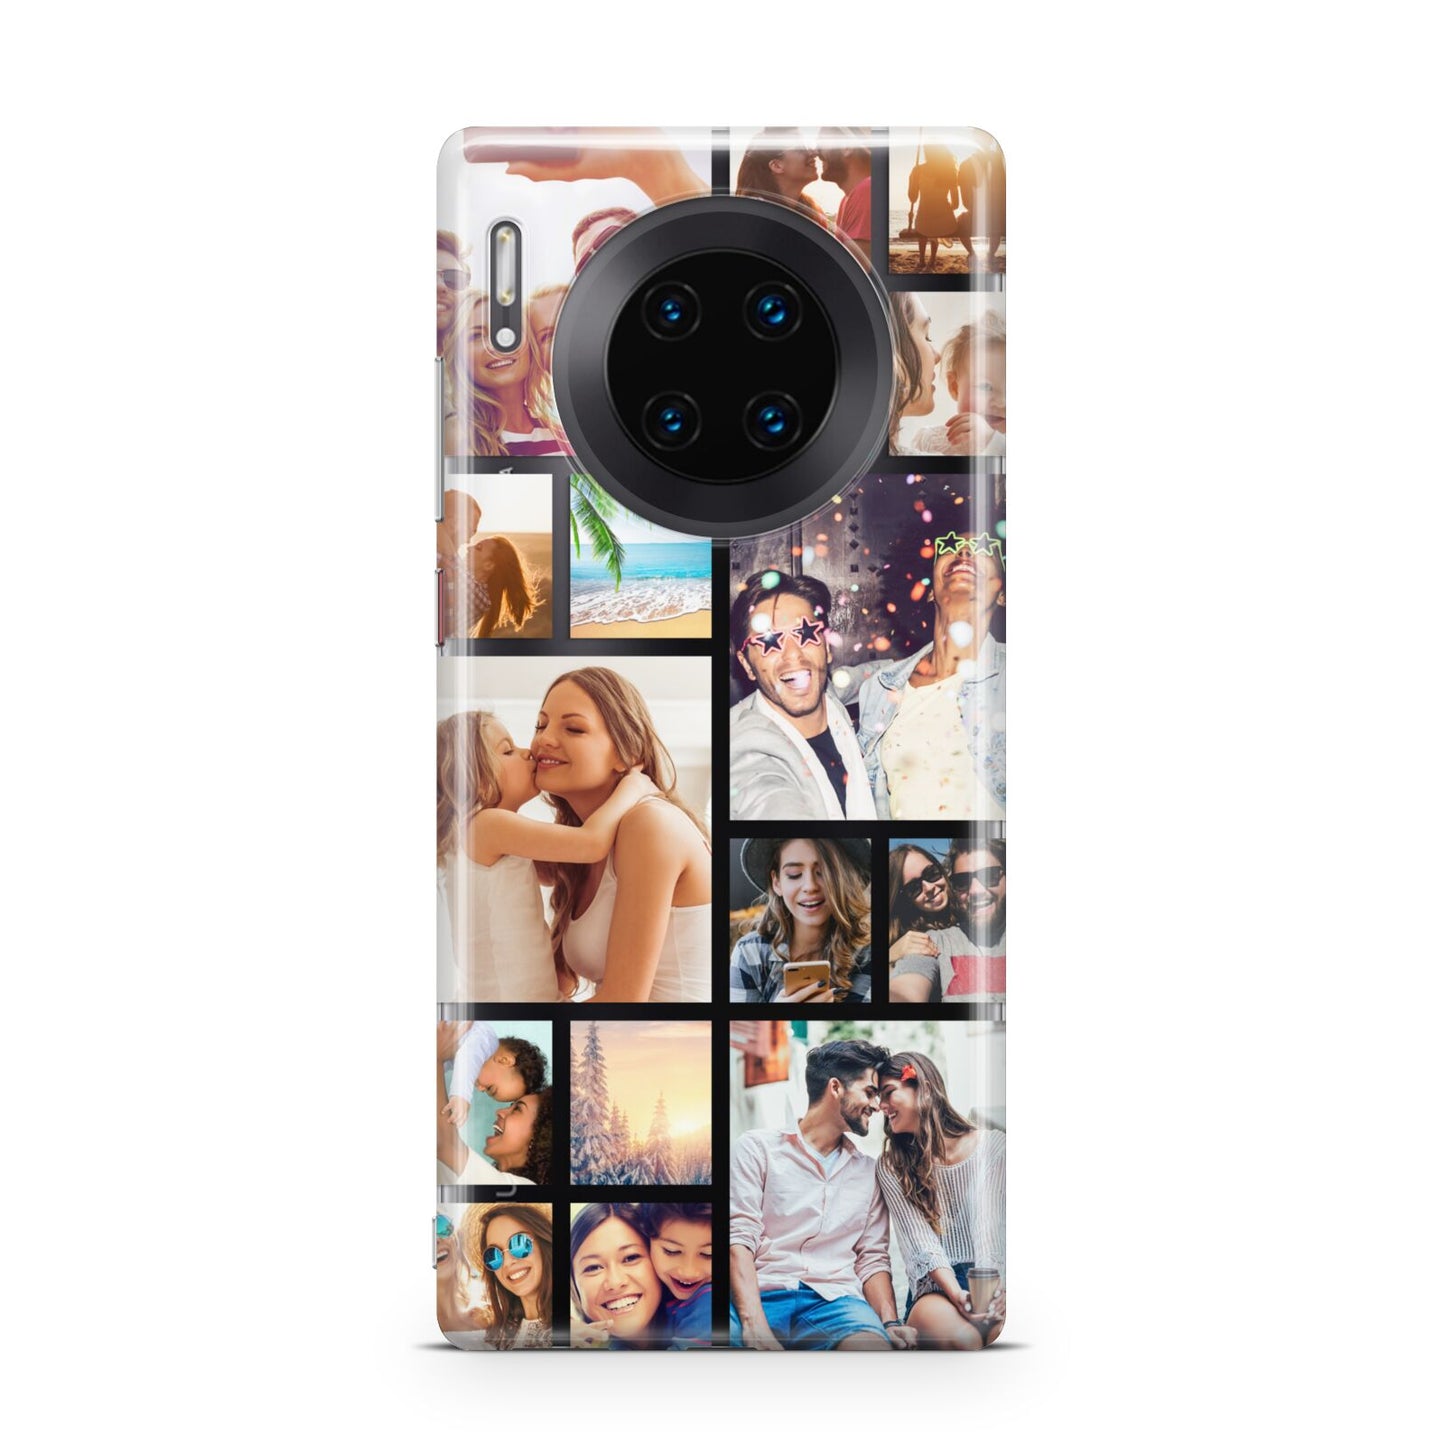 Abstract Multi Tile Photo Montage Upload Huawei Mate 30 Pro Phone Case